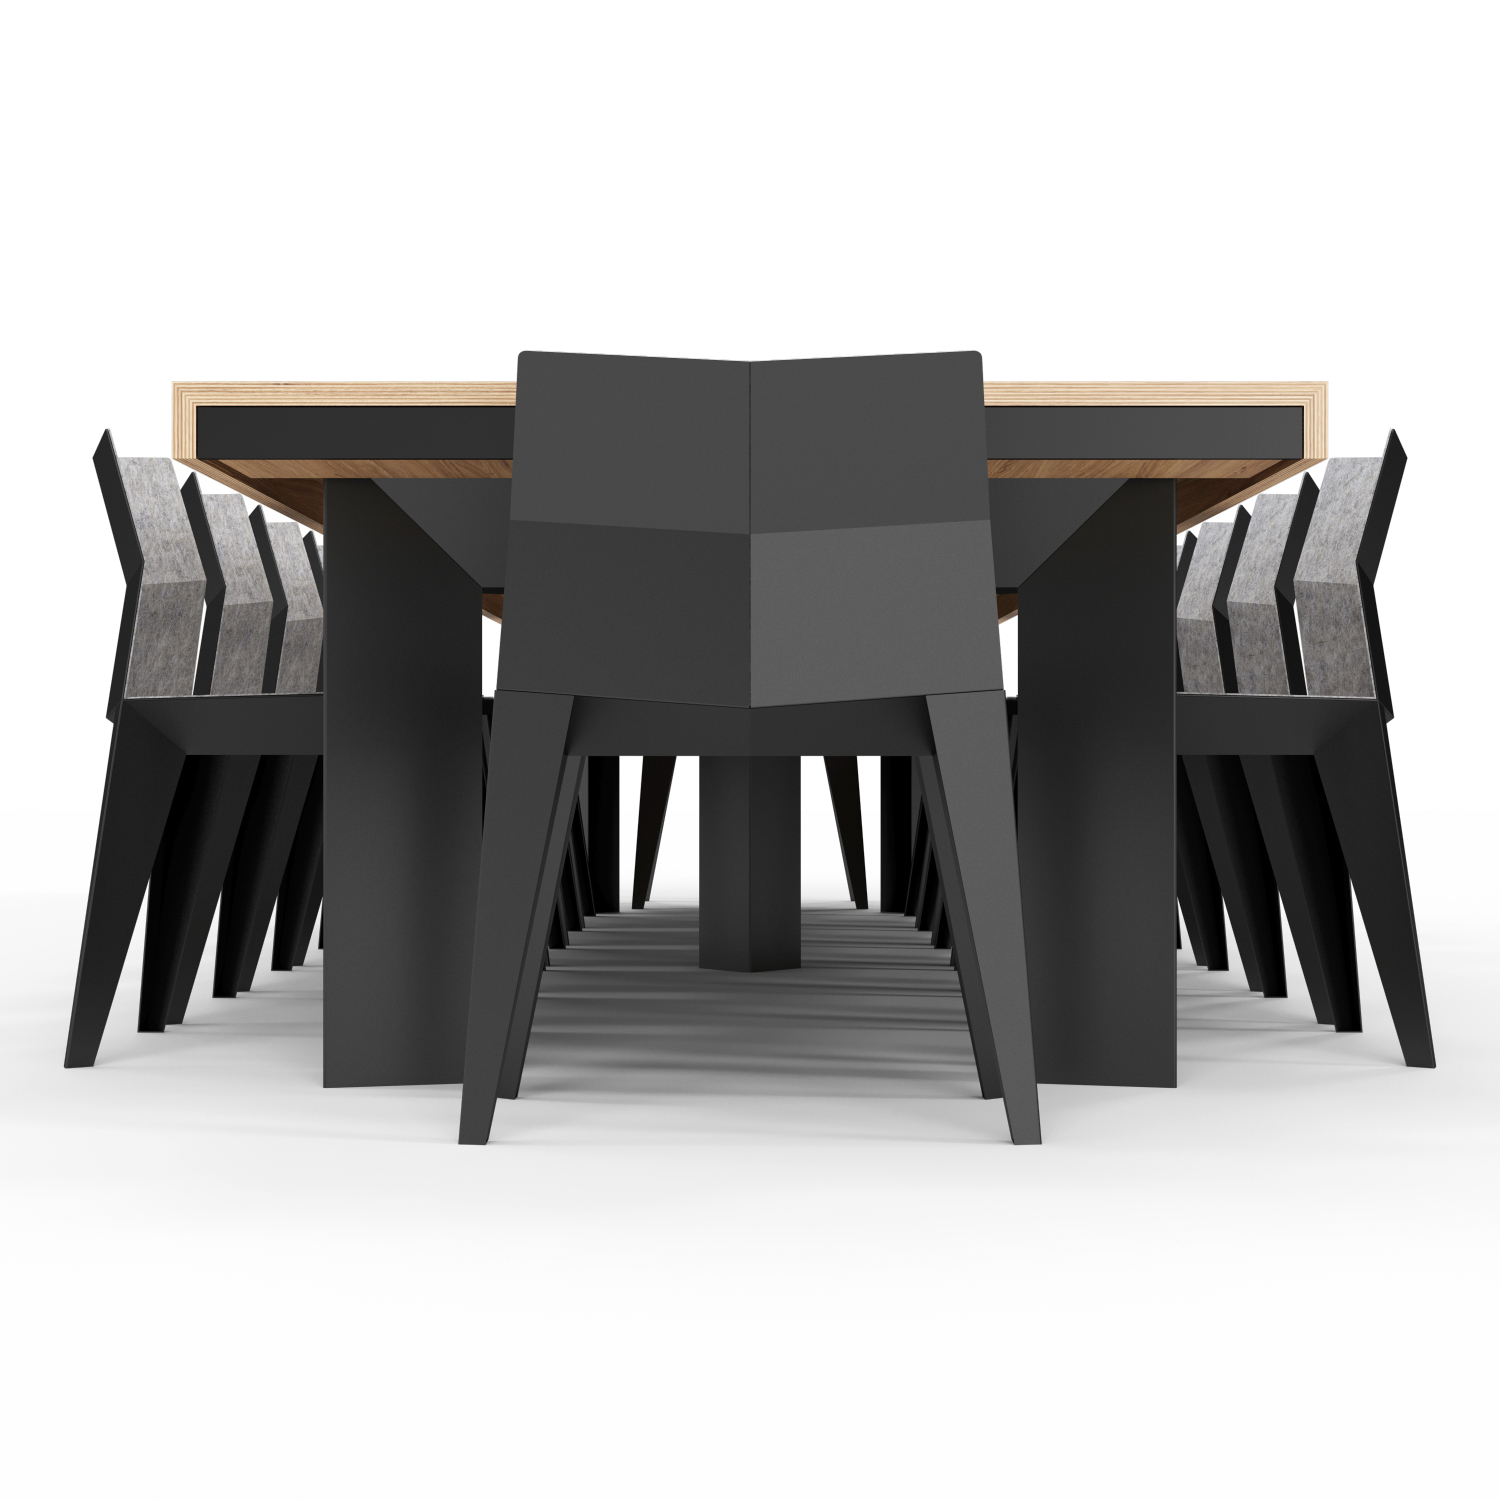 OE4/L conference table